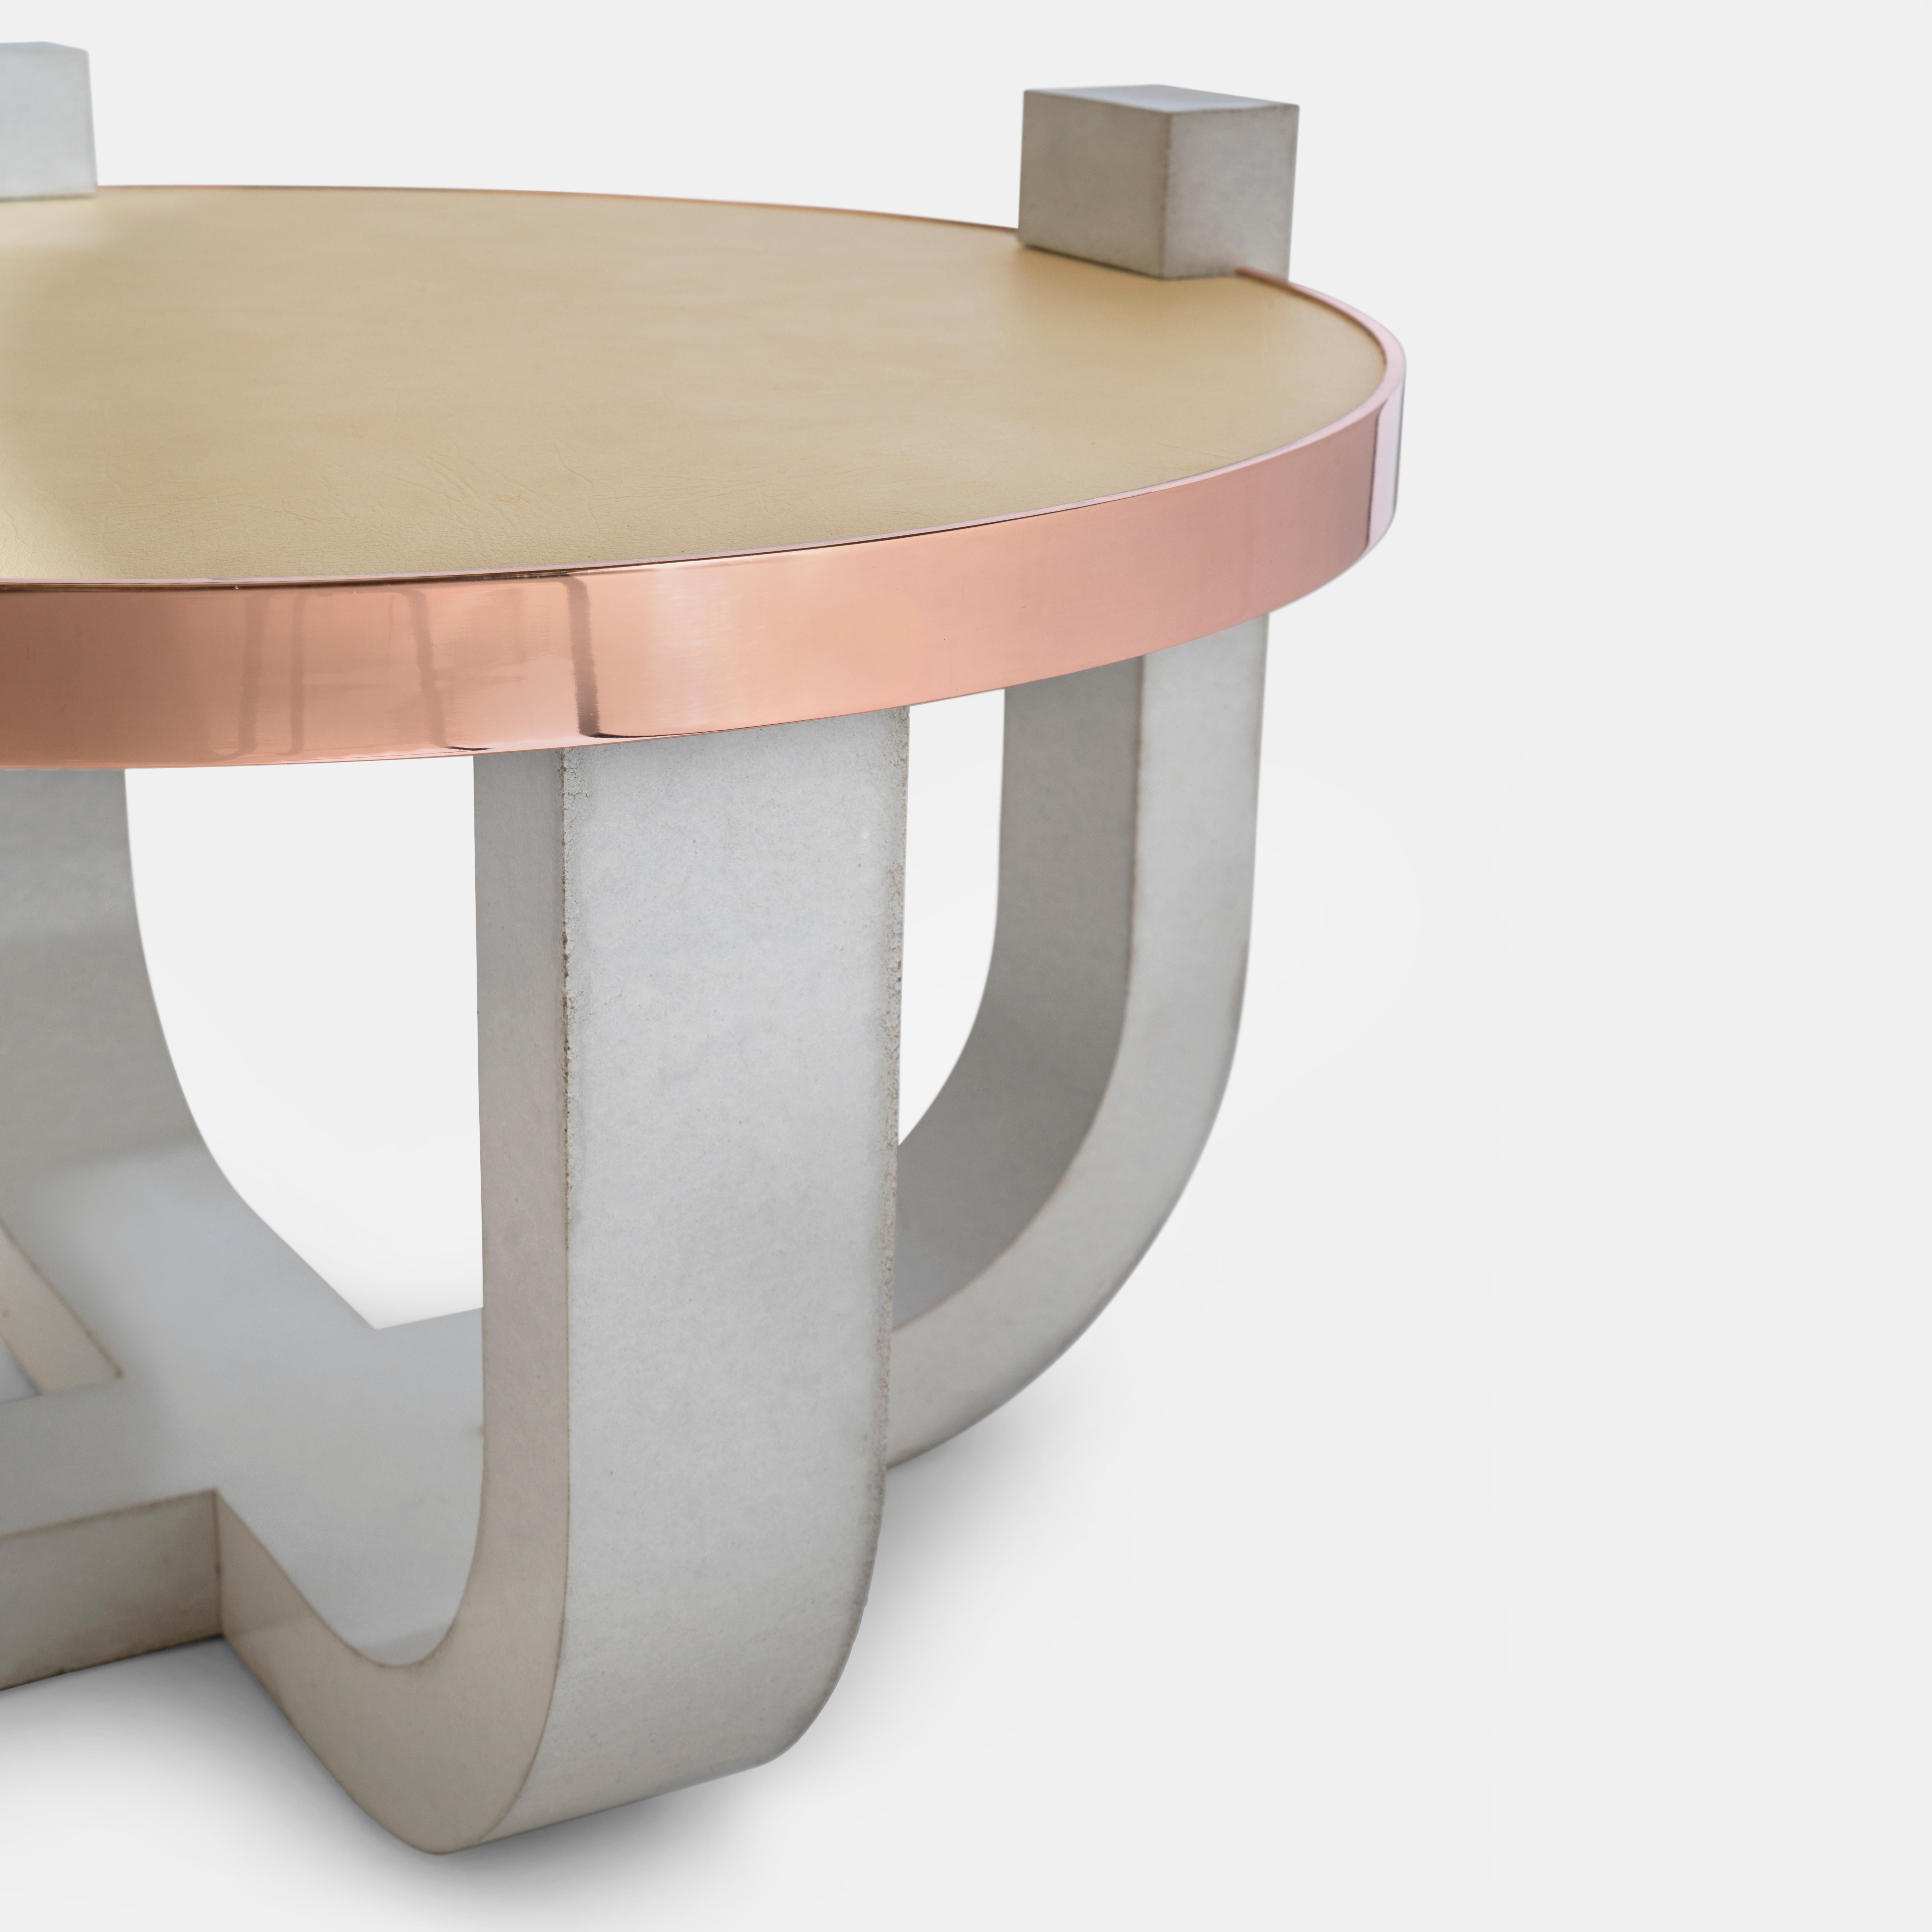 Plated Brutalist Modern Concrete Leather-Top Round Coffee Table with Rose Gold Detail For Sale